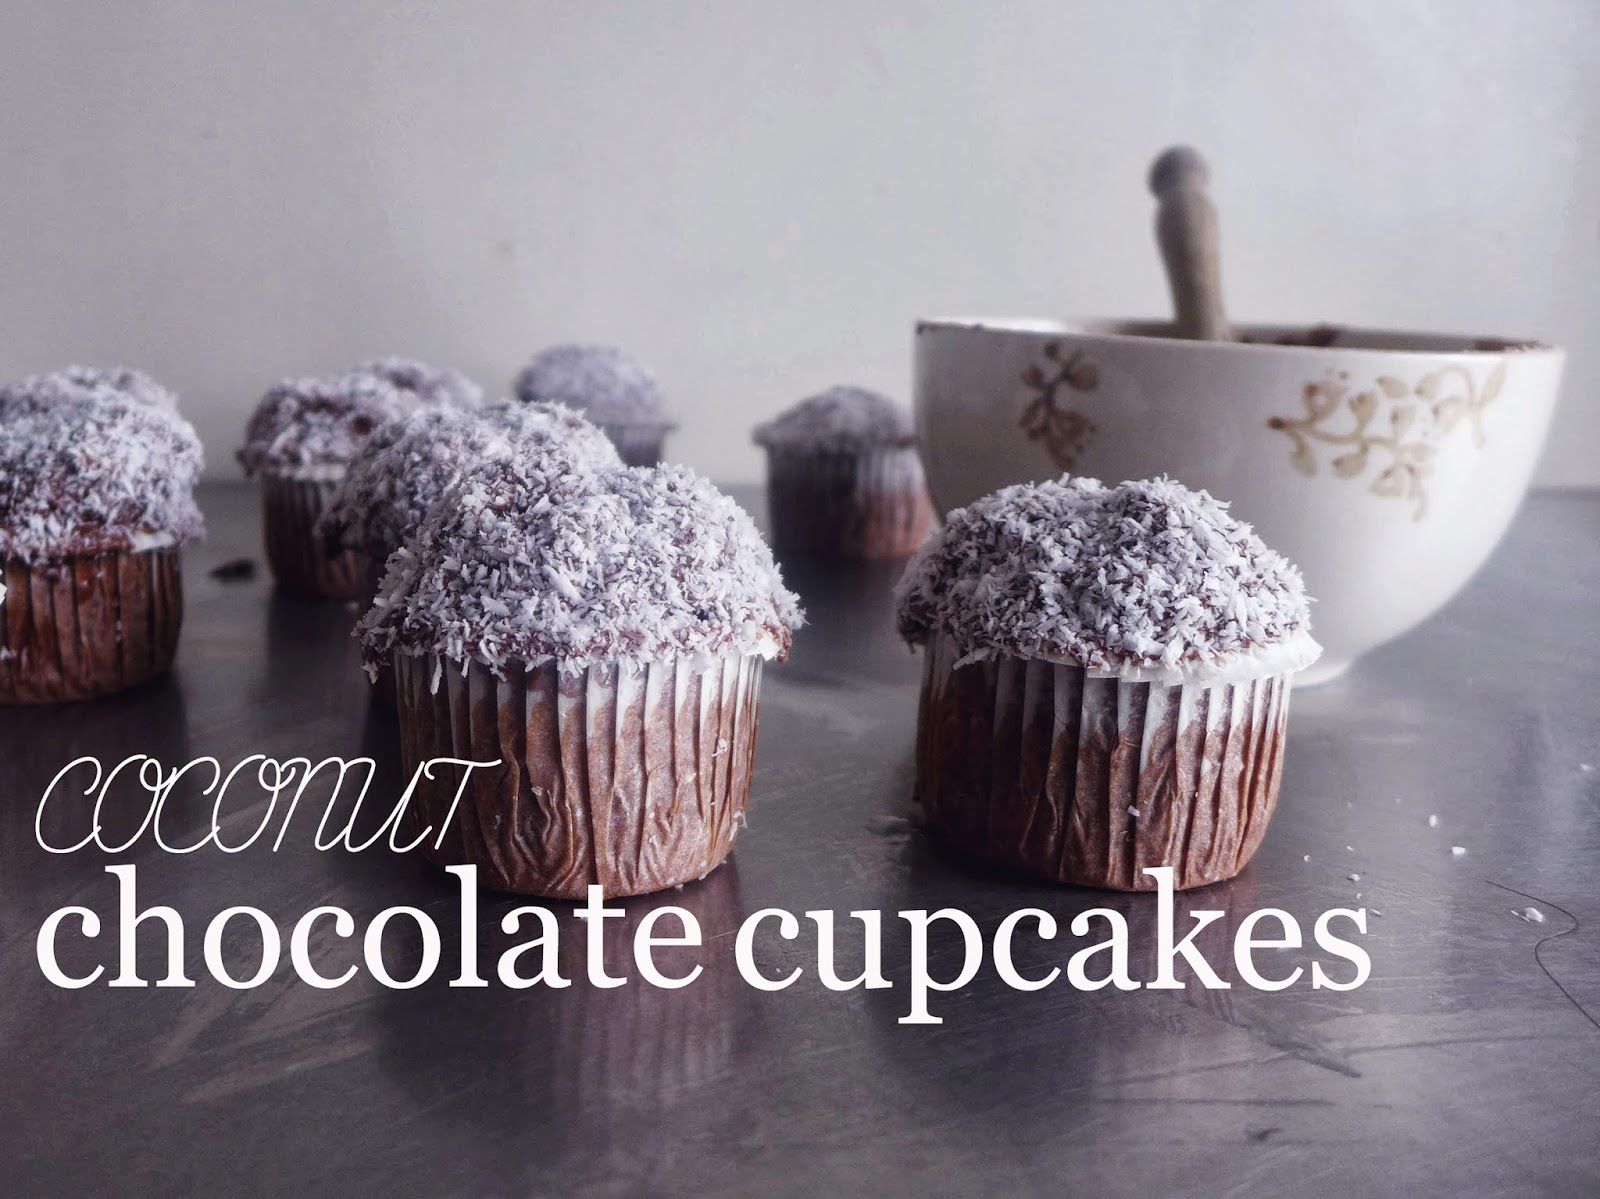 Cupcakes: chocolate e coco/ Coconut and chocolate cupcakes